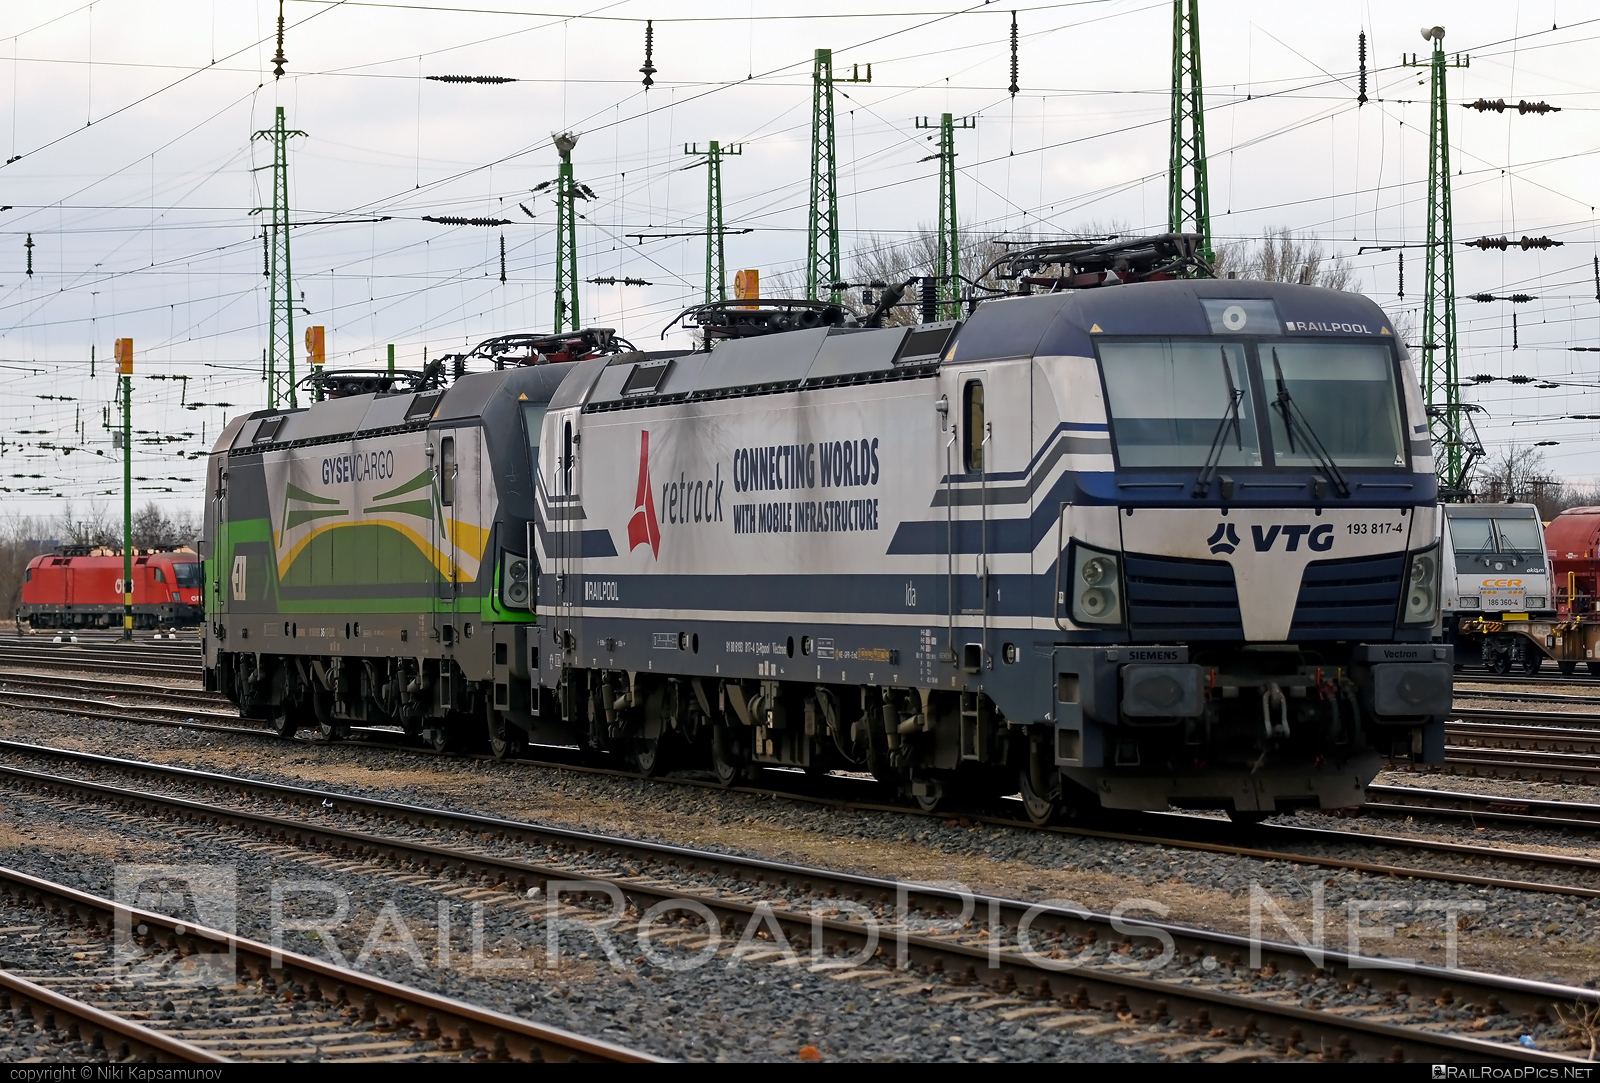 Siemens Vectron AC - 193 817-4 operated by Retrack Slovakia s. r. o. #railpool #railpoolgmbh #retrackslovakia #siemens #siemensVectron #siemensVectronAC #vectron #vectronAC #vtg